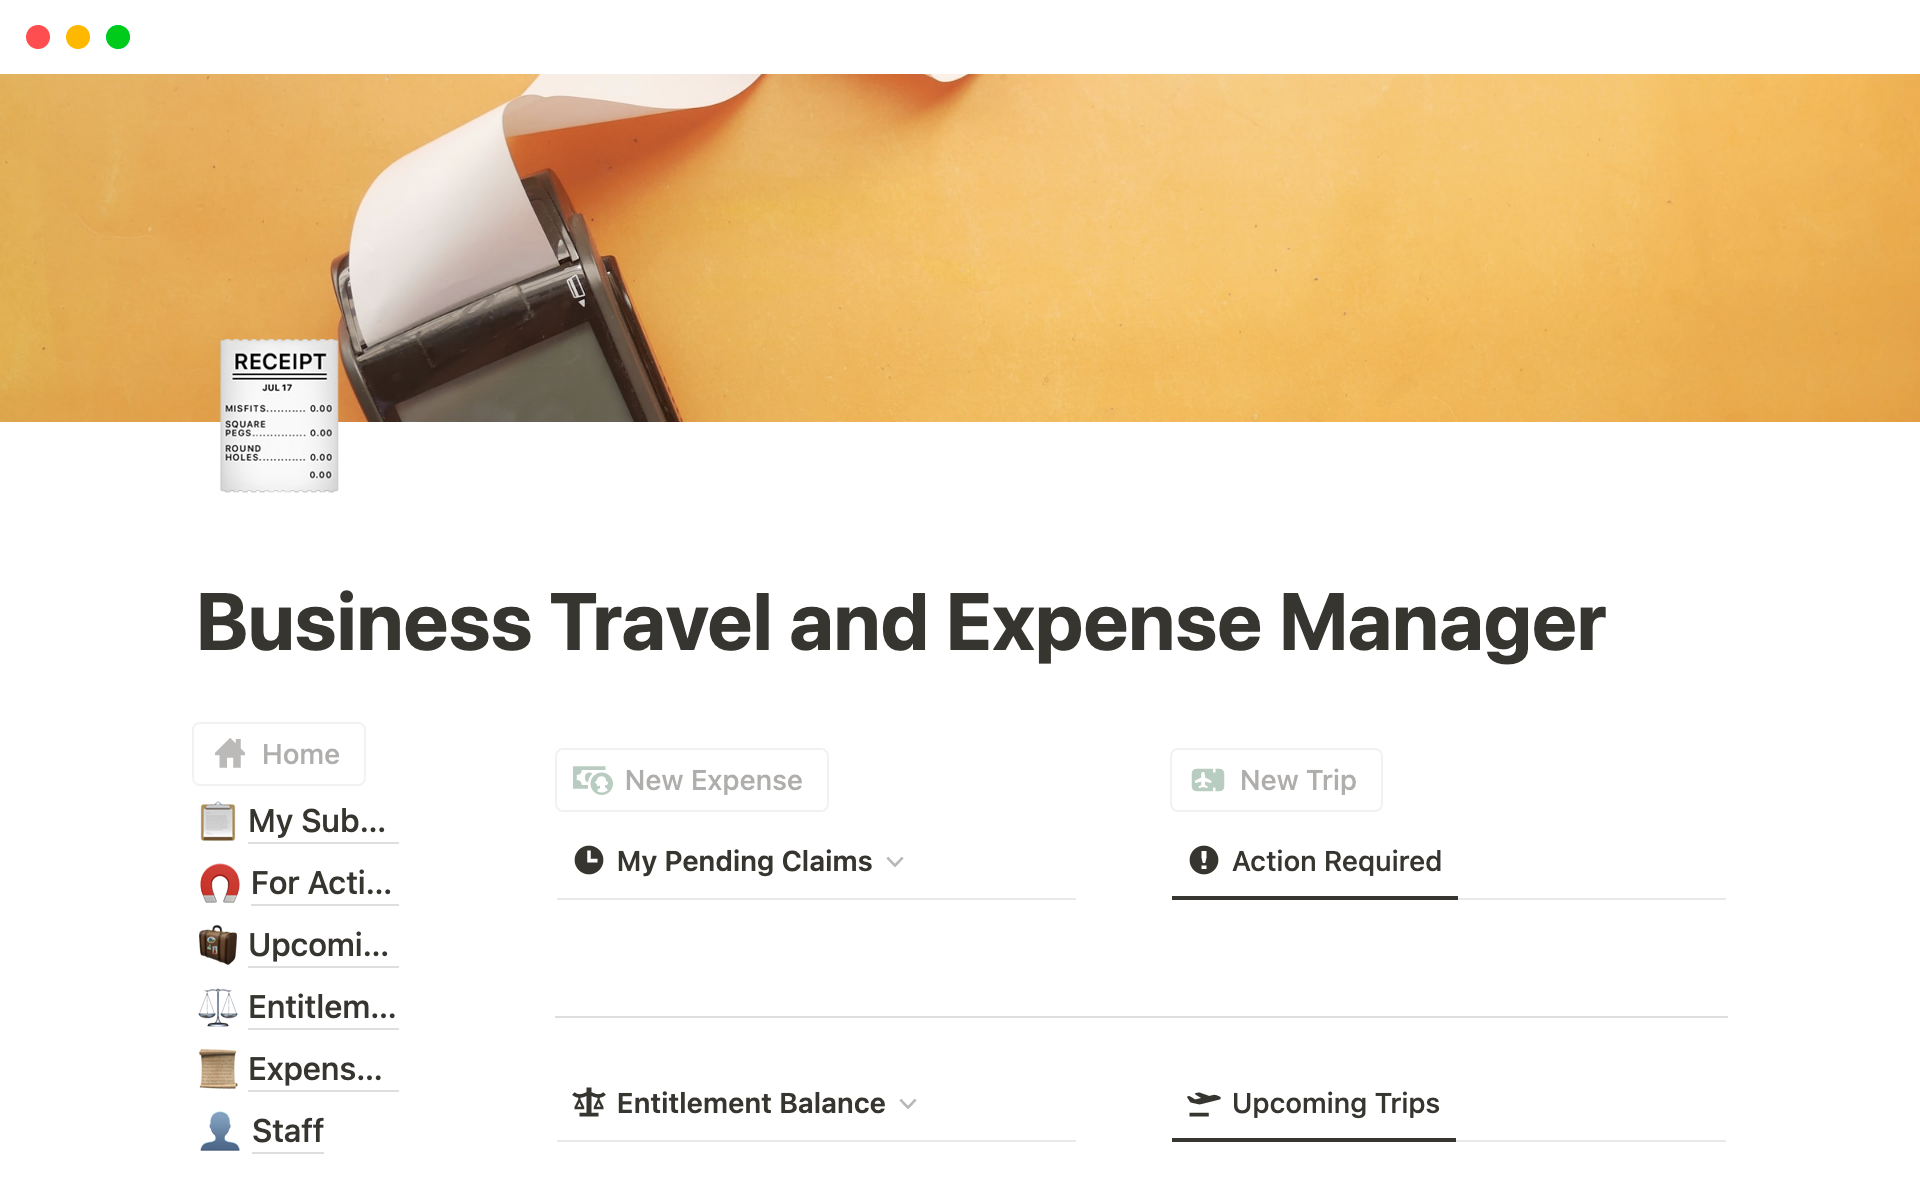 This template simplifies business travel and expense management by providing a centralized platform to track expenses and stay on budget.